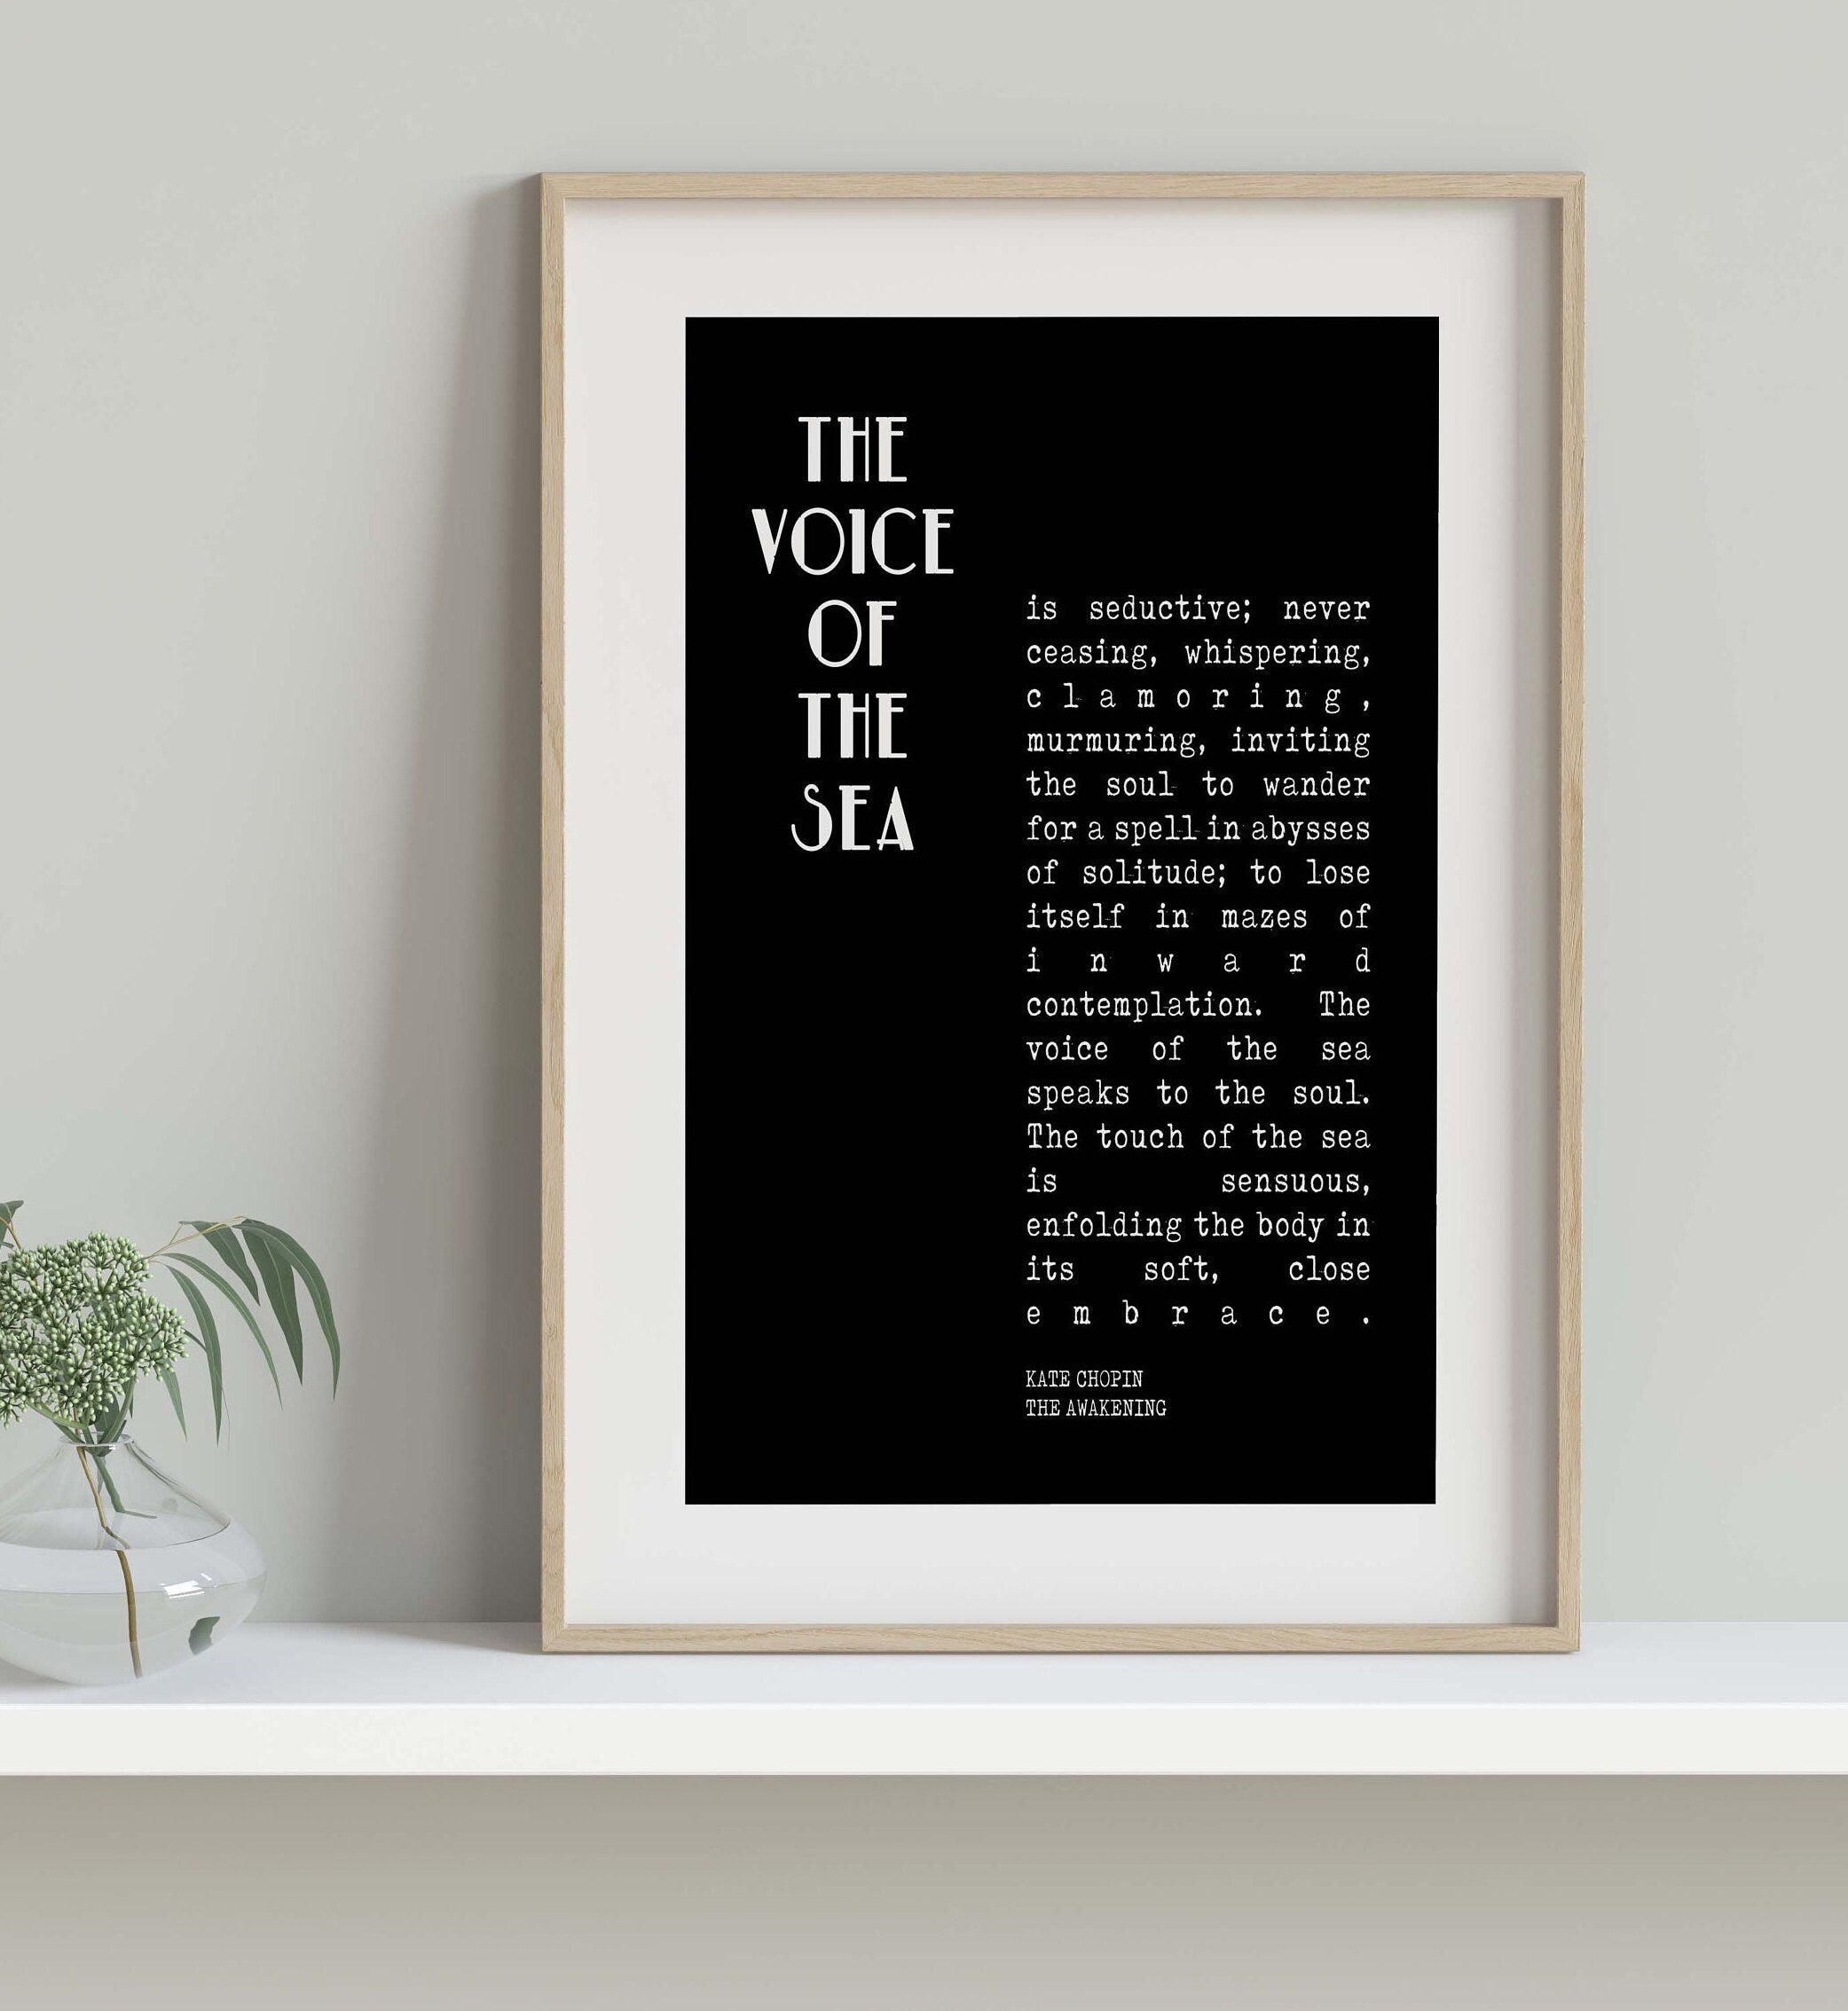 The Voice of the Sea The Awakening Quote Inspirational Print Gift, Kate Chopin Typography Print in Black & White Unframed or Framed Art